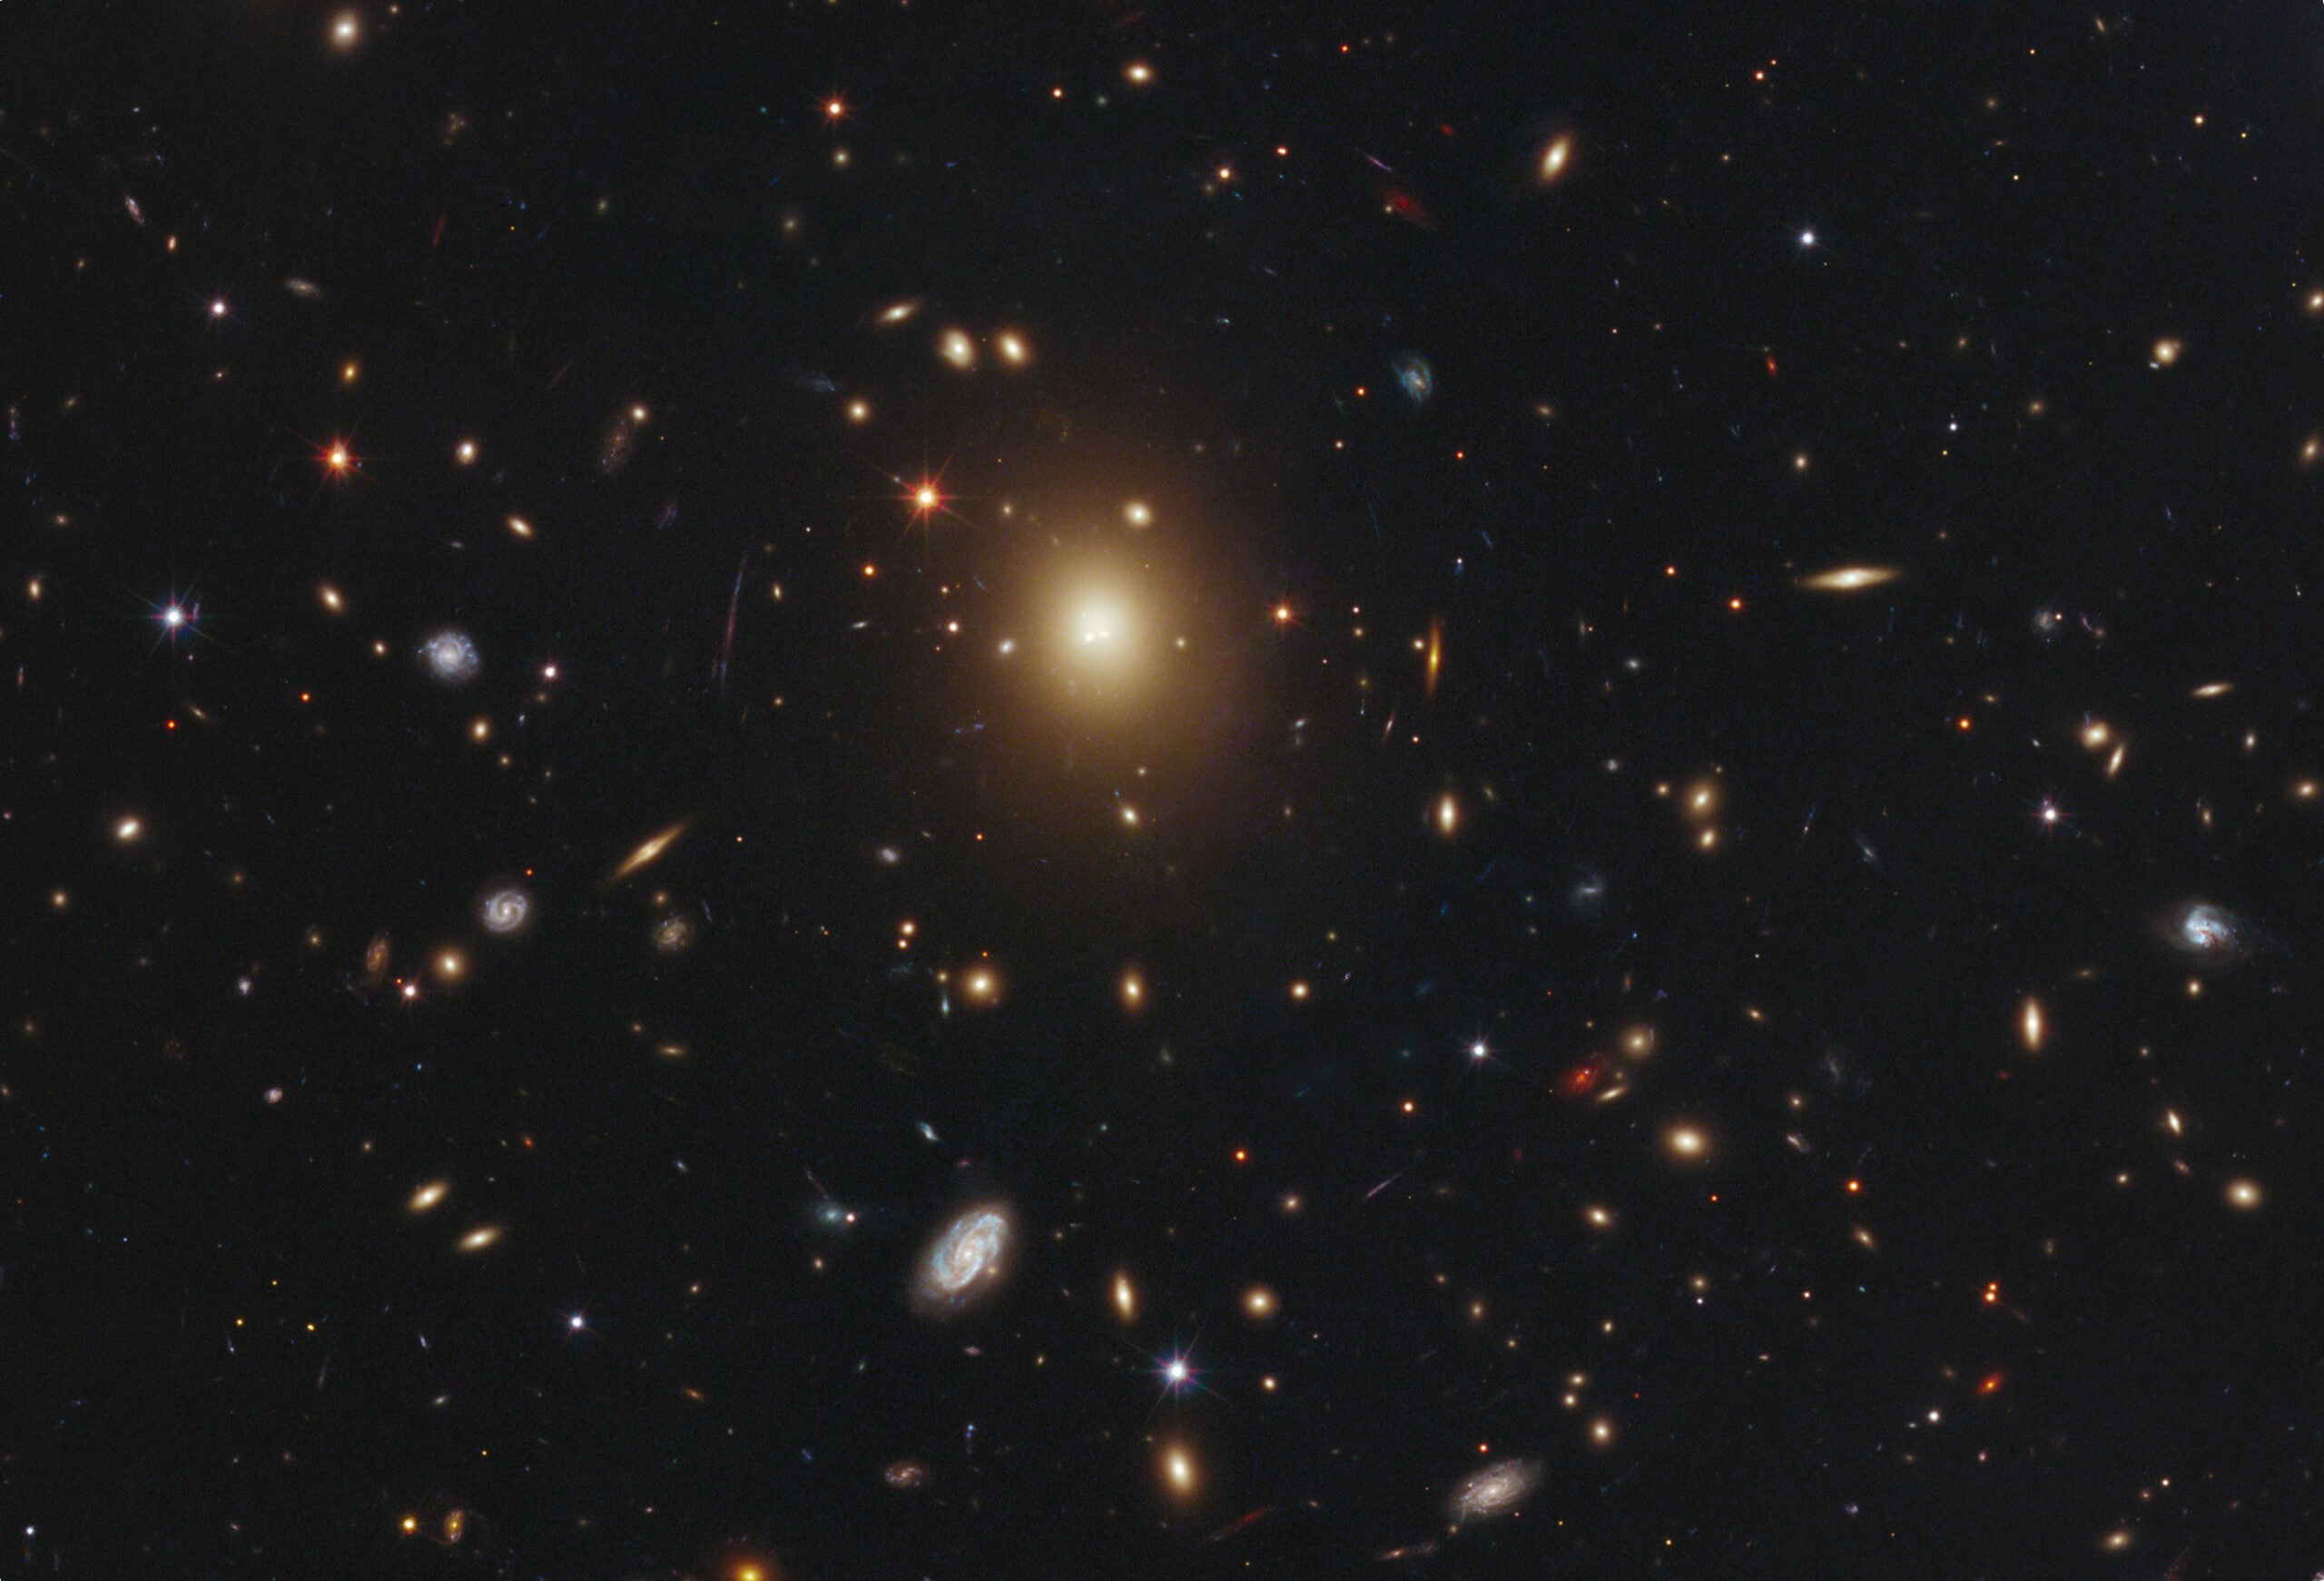 Galaxy Cluster Abell 2261 scaled